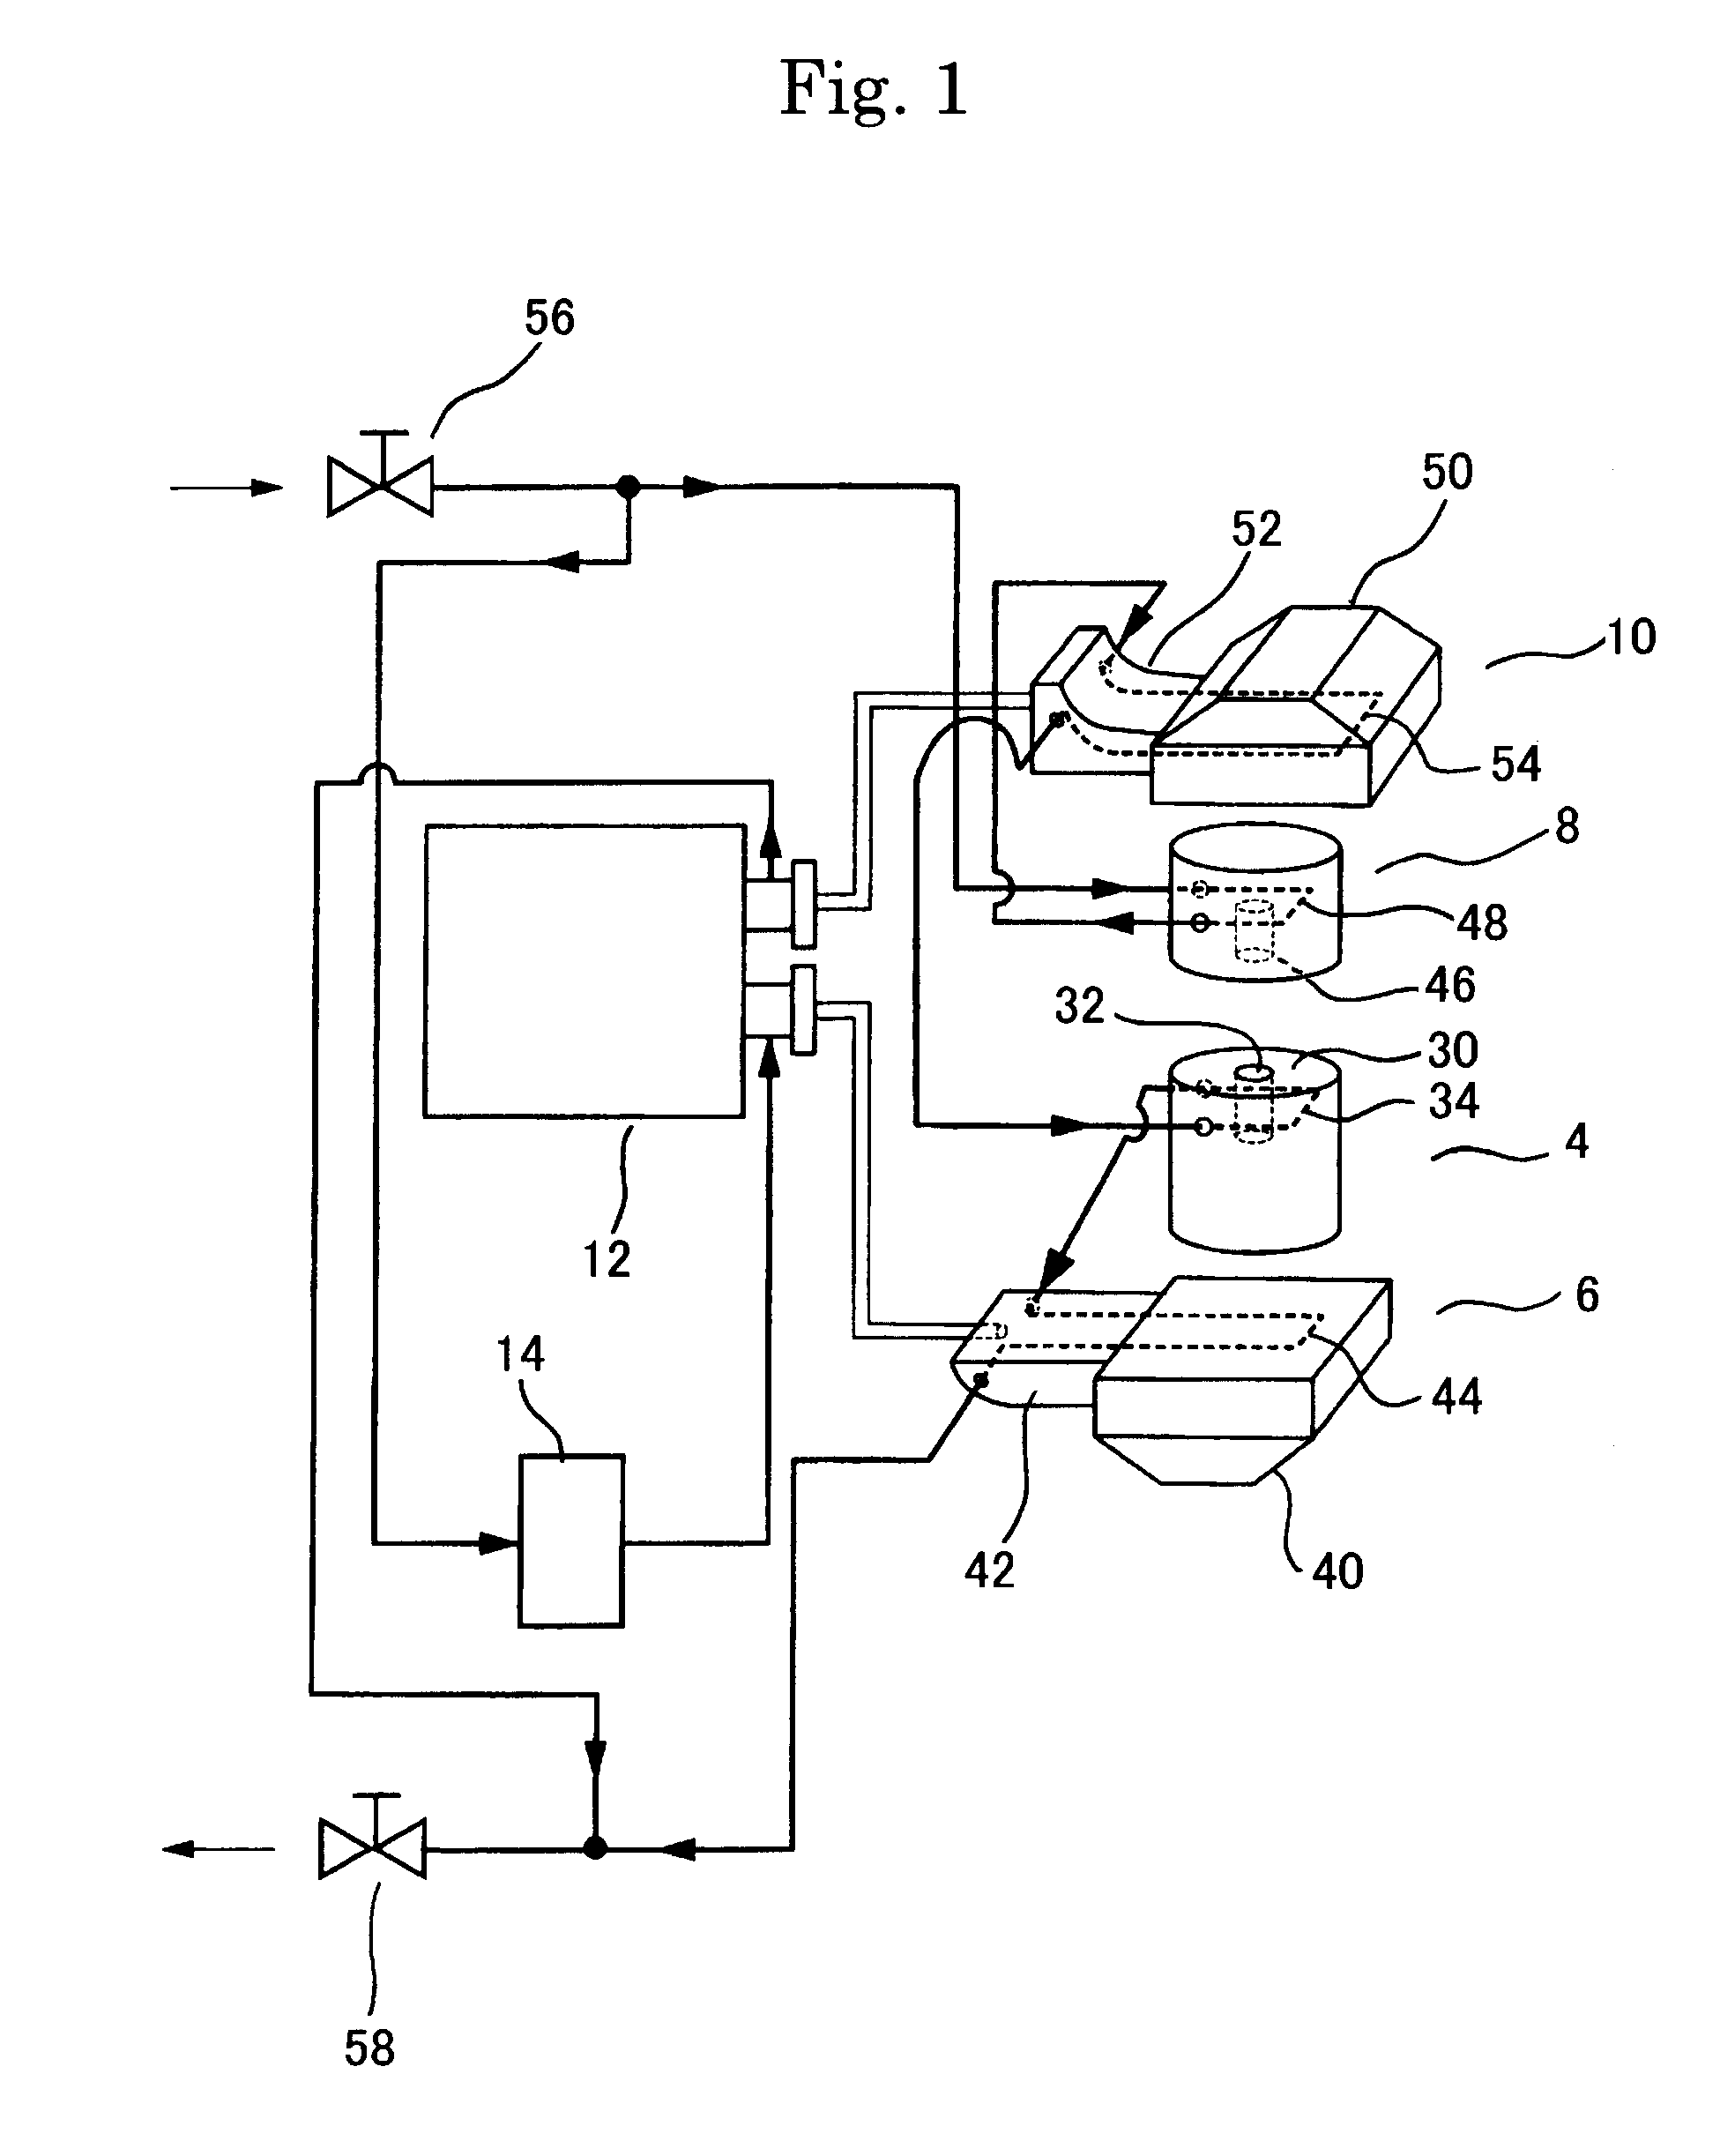 Method of joining part having high fatigue strength